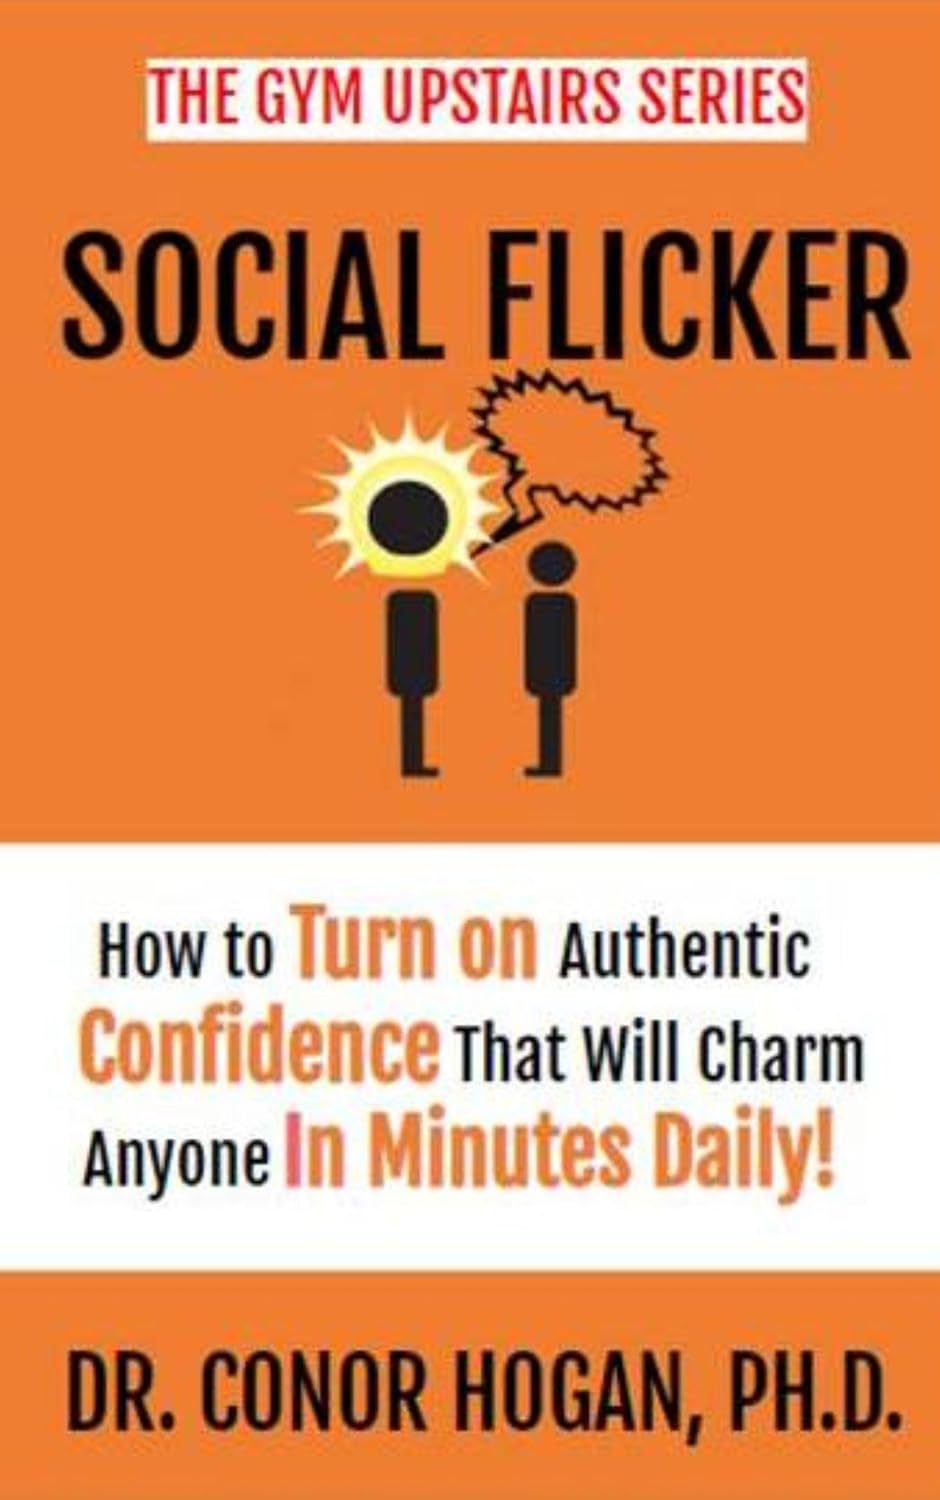 How to Turn on Authentic Confidence That Will Charm Anyone in Minutes